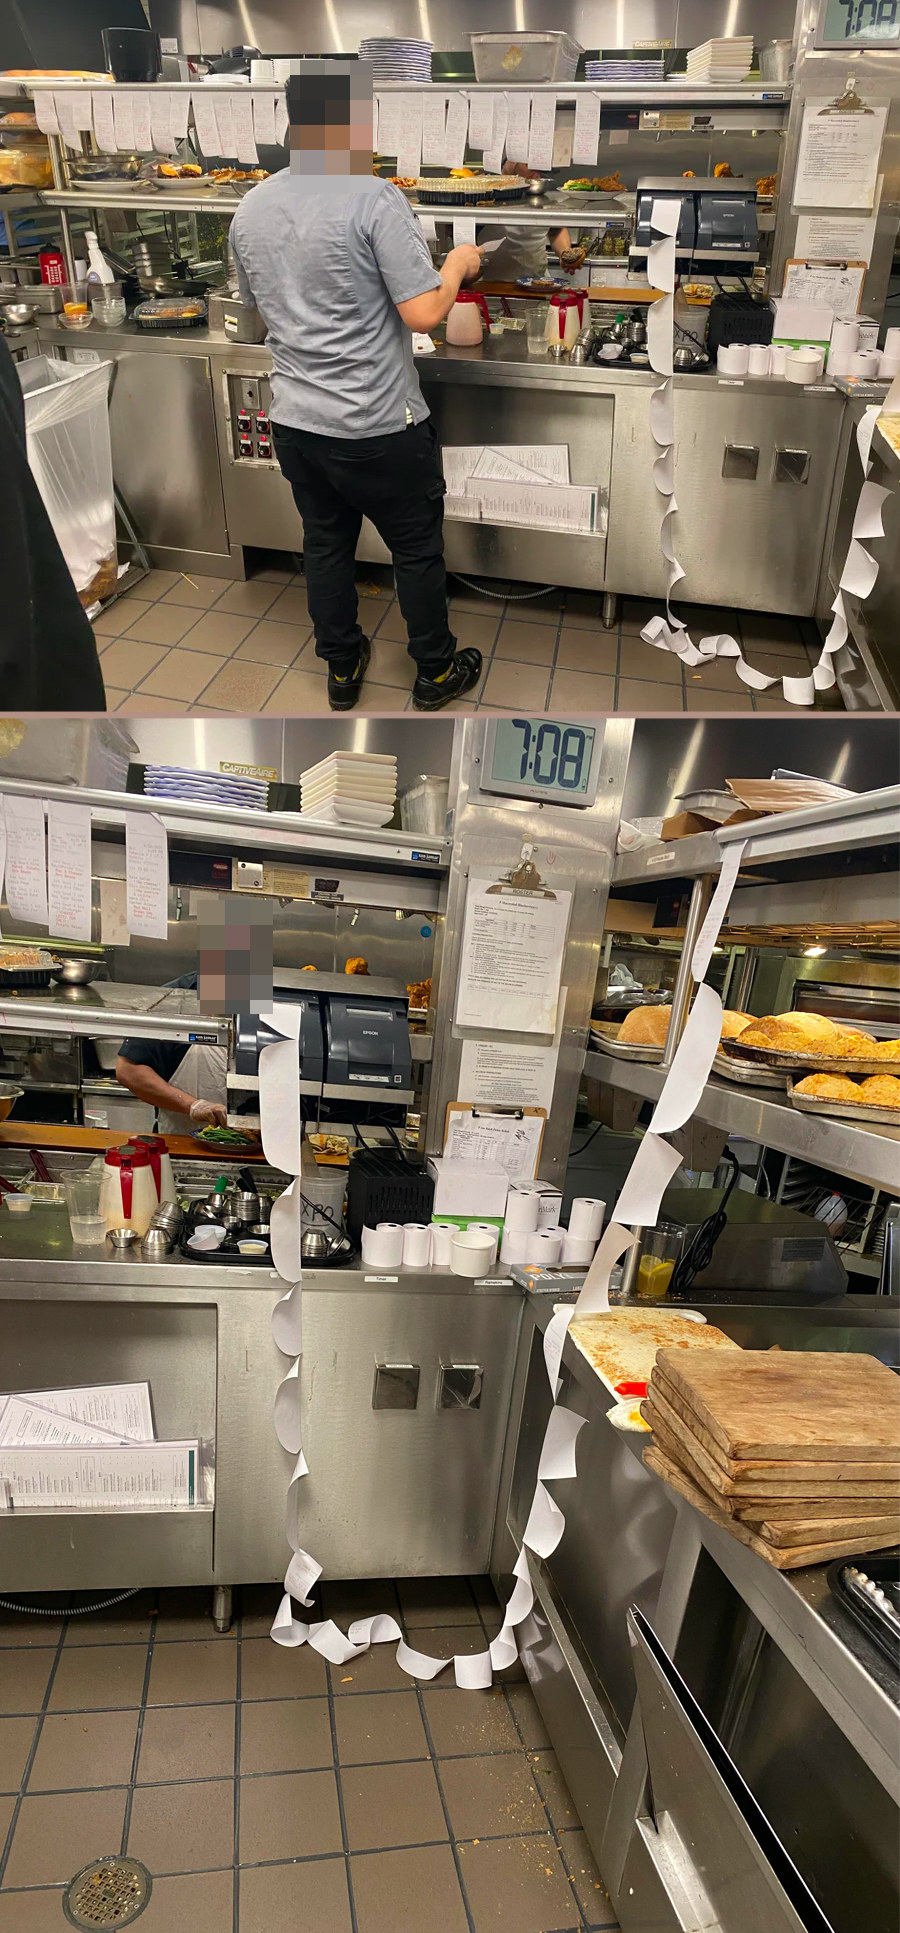 A row of ticket orders in a kitchen that extends from the register down to the floor and up again